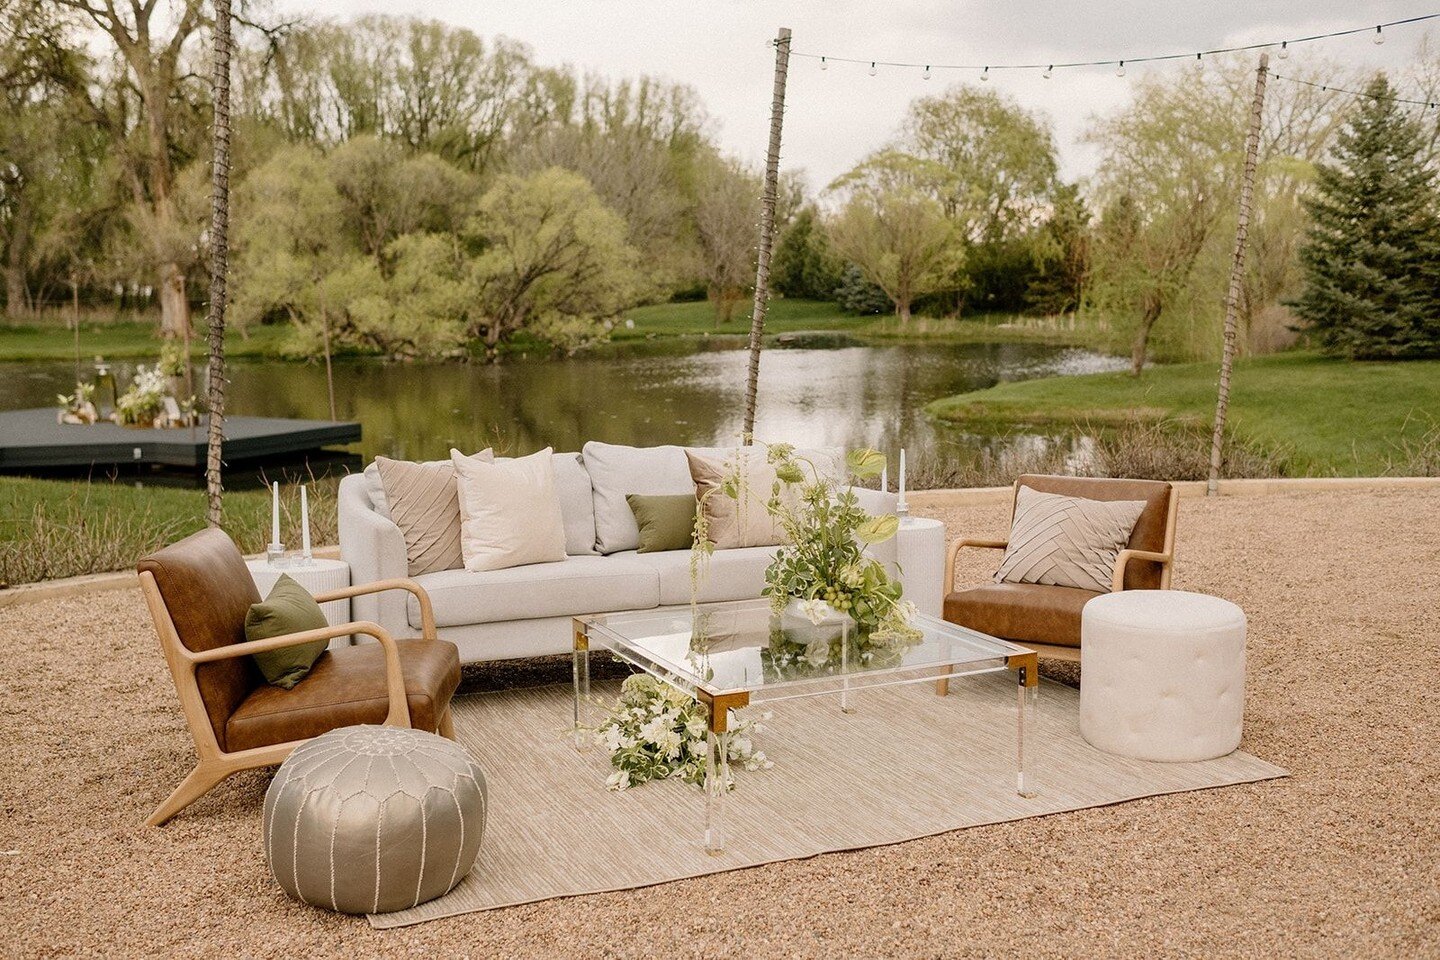 ✨Lounge by the lake ✨⁠
⁠
Such a hidden gem of a venue! @burning_sky_farm⁠
Bringing beauty to match the outdoors with our lounge and furniture rentals.🤍⁠
⁠
⁠
#pillows #livingroomdesign #luxury #furnituredesign #furniture #outside #decor #outdoorfurni